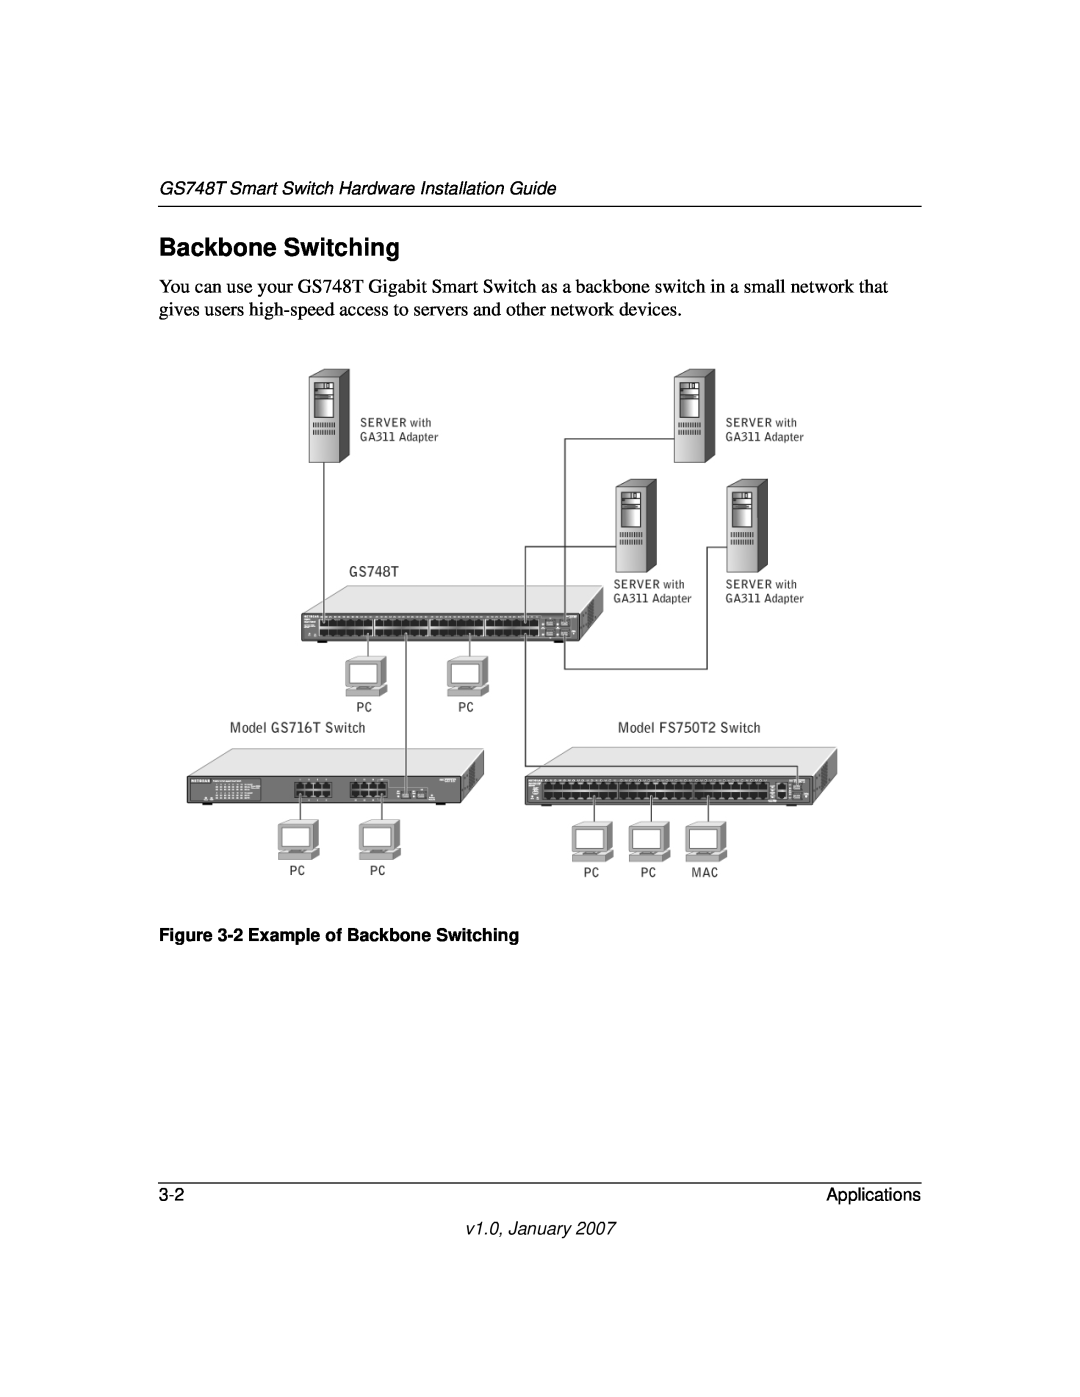 NETGEAR manual GS748T Smart Switch Hardware Installation Guide, 2 Example of Backbone Switching, Applications 